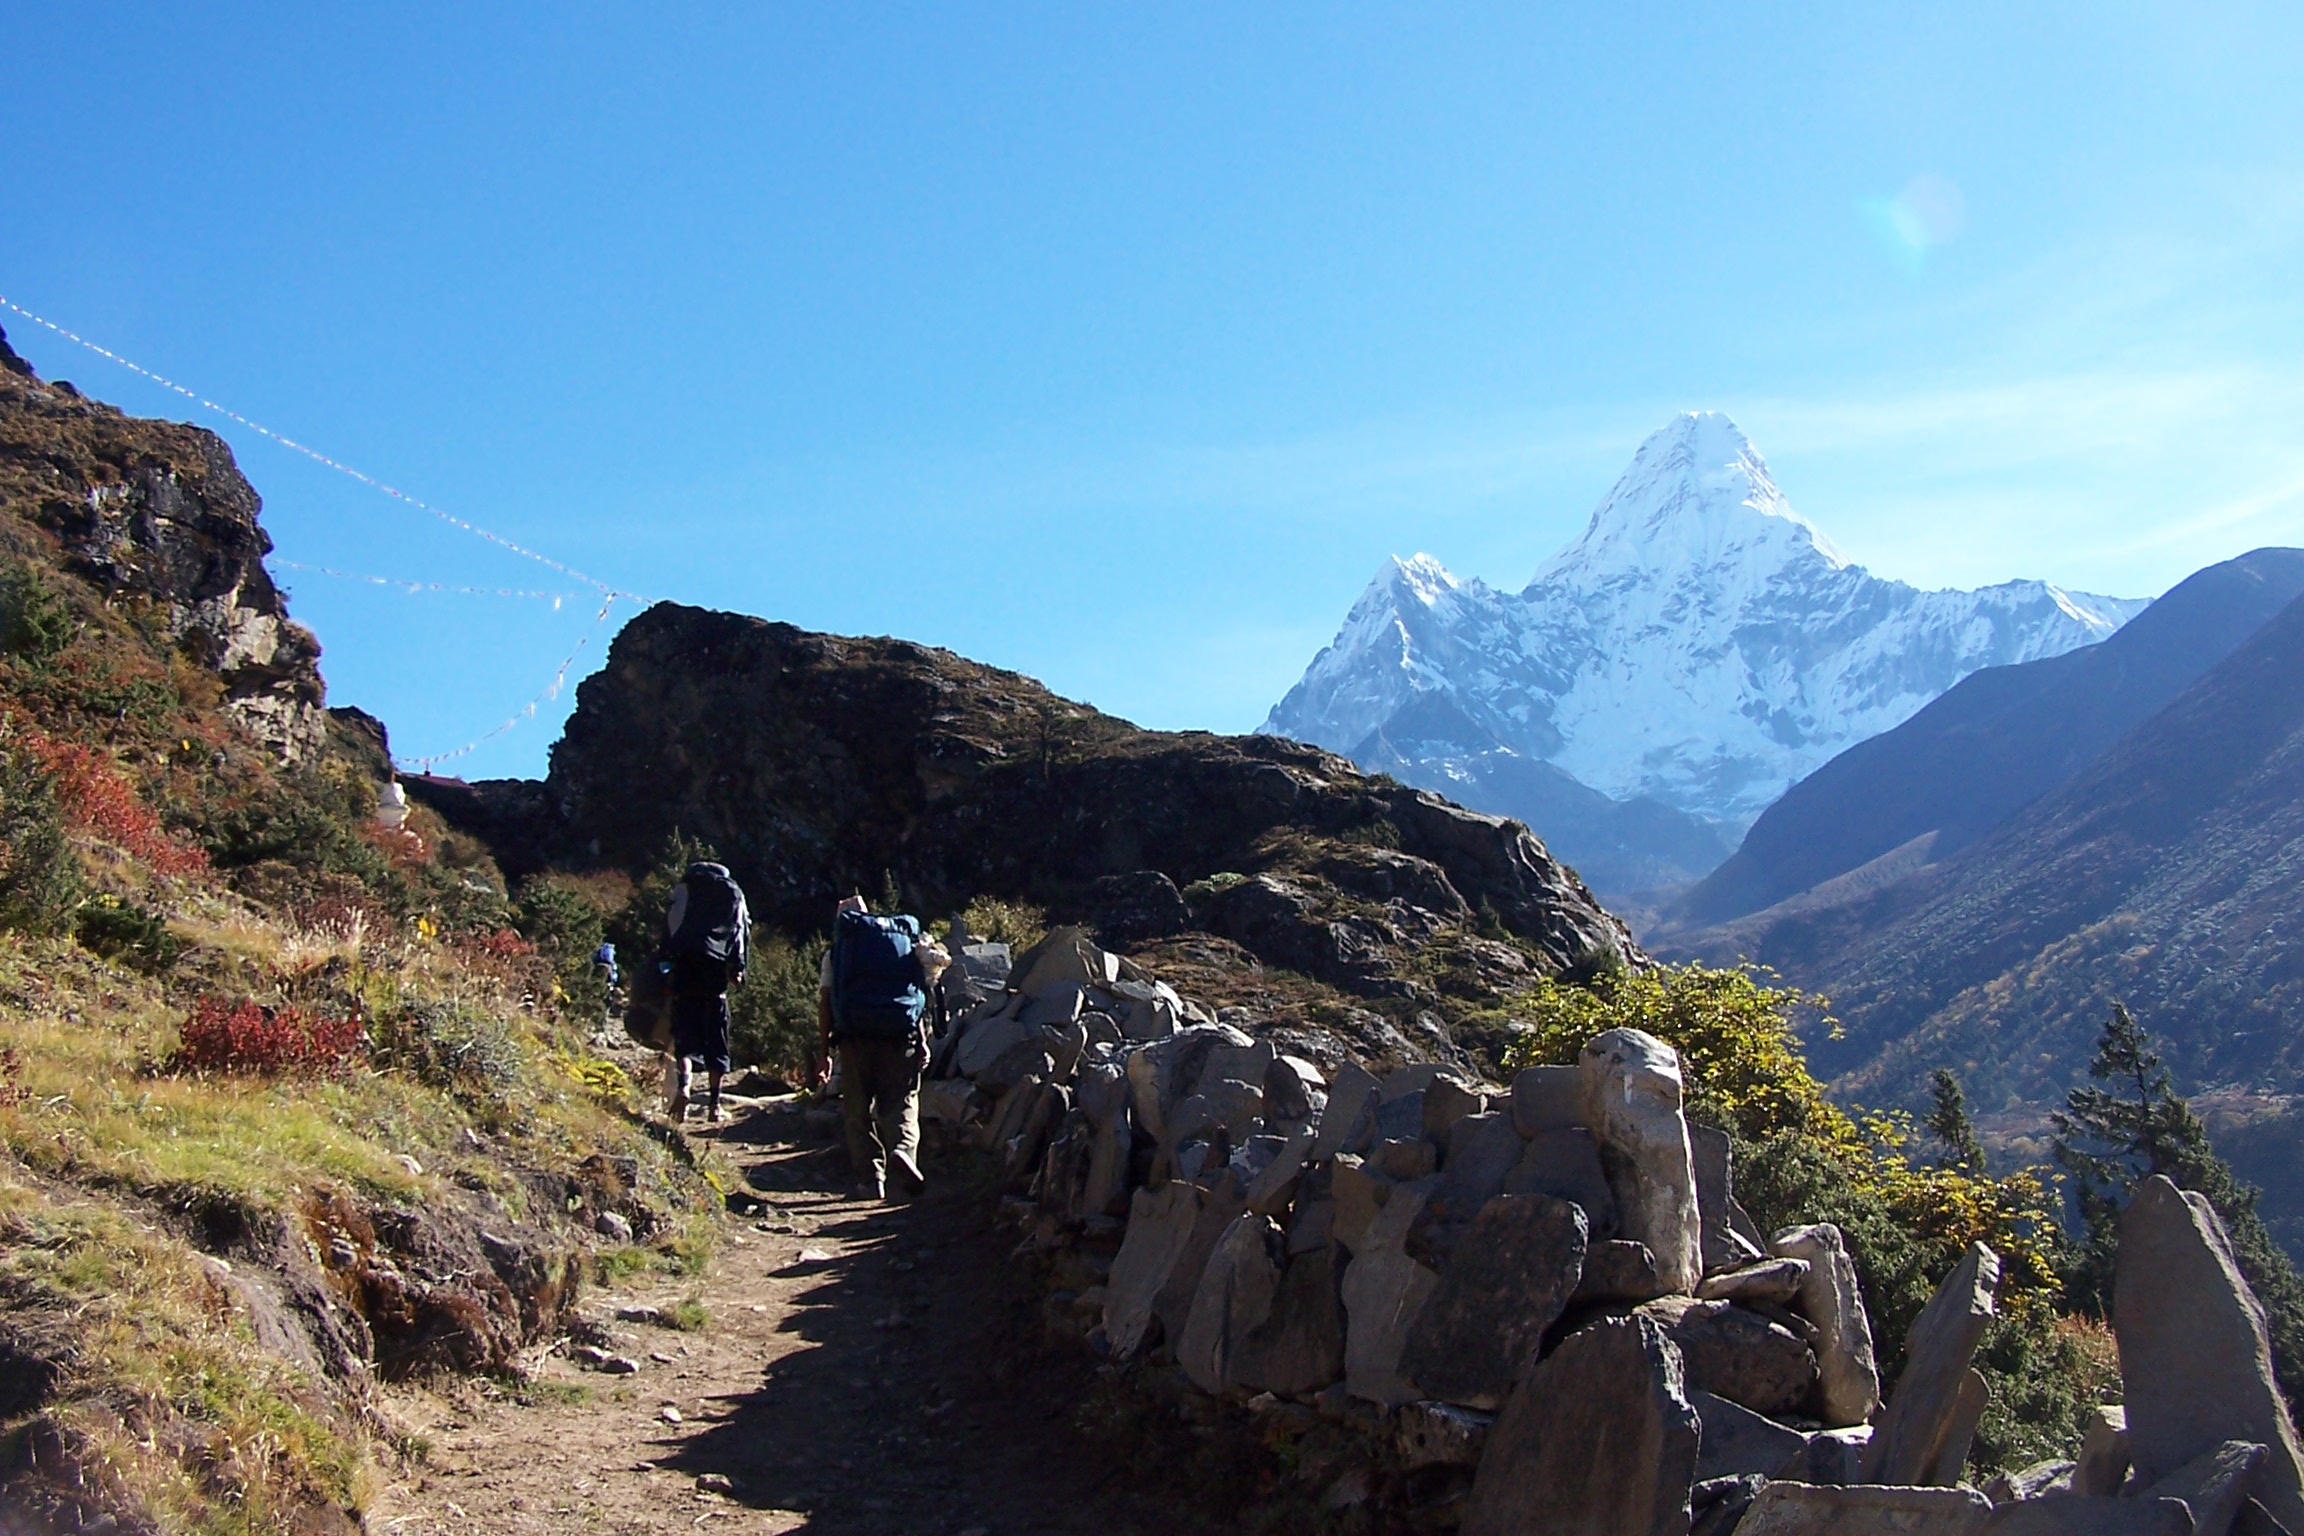 Difficulty of trekking to Everest base camp